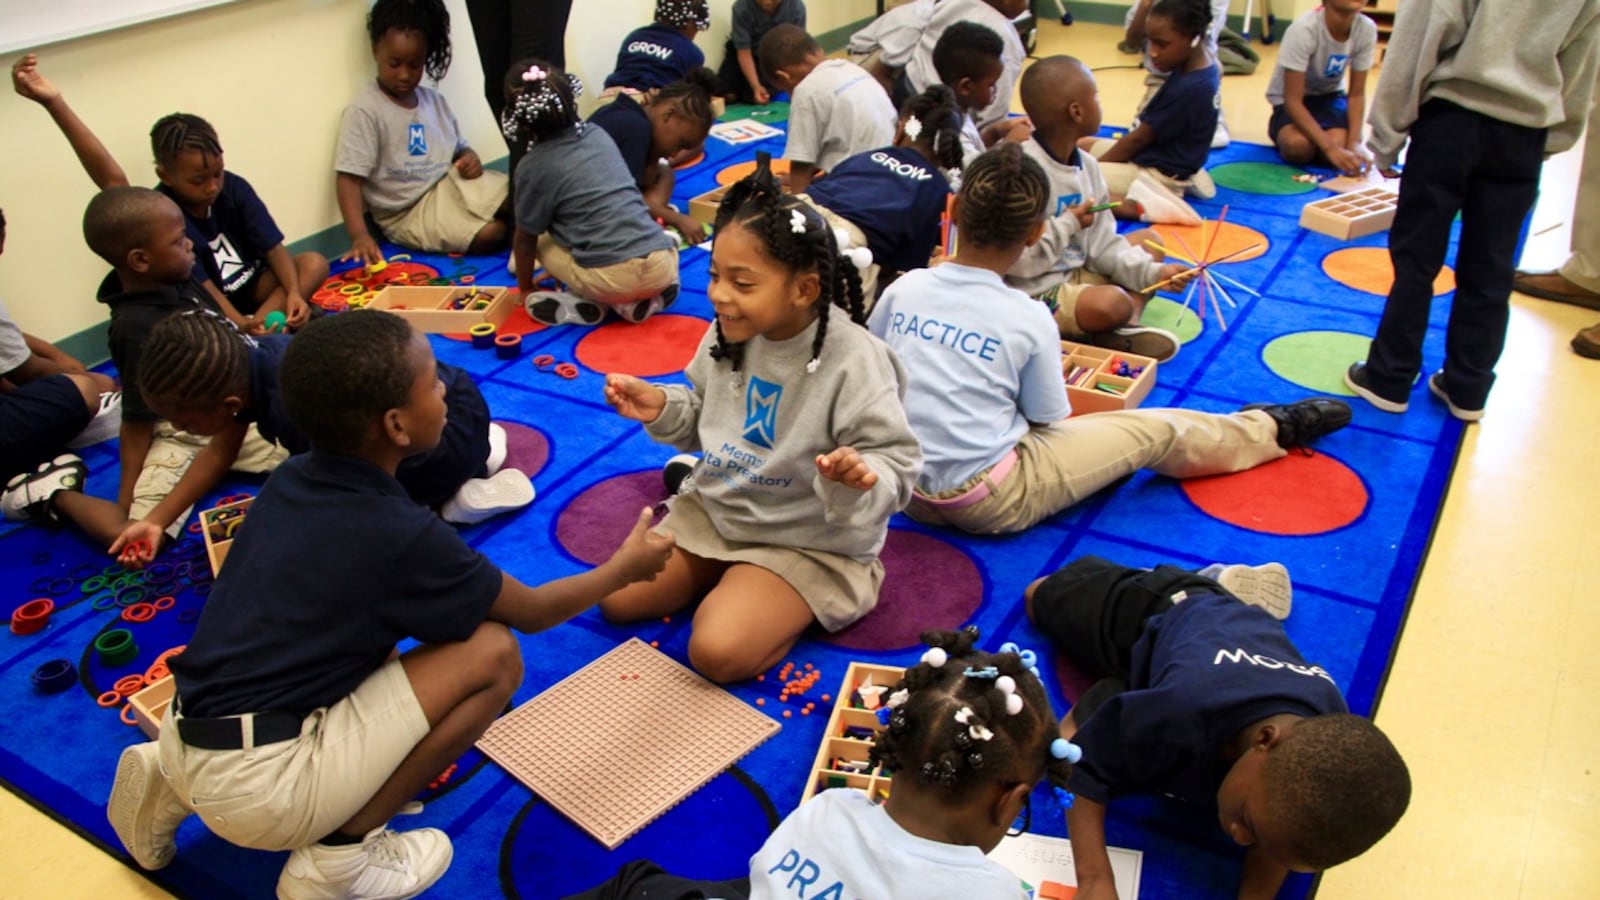 Students learn at Memphis Delta Preparatory, one of more than 100 charter schools in Tennessee.